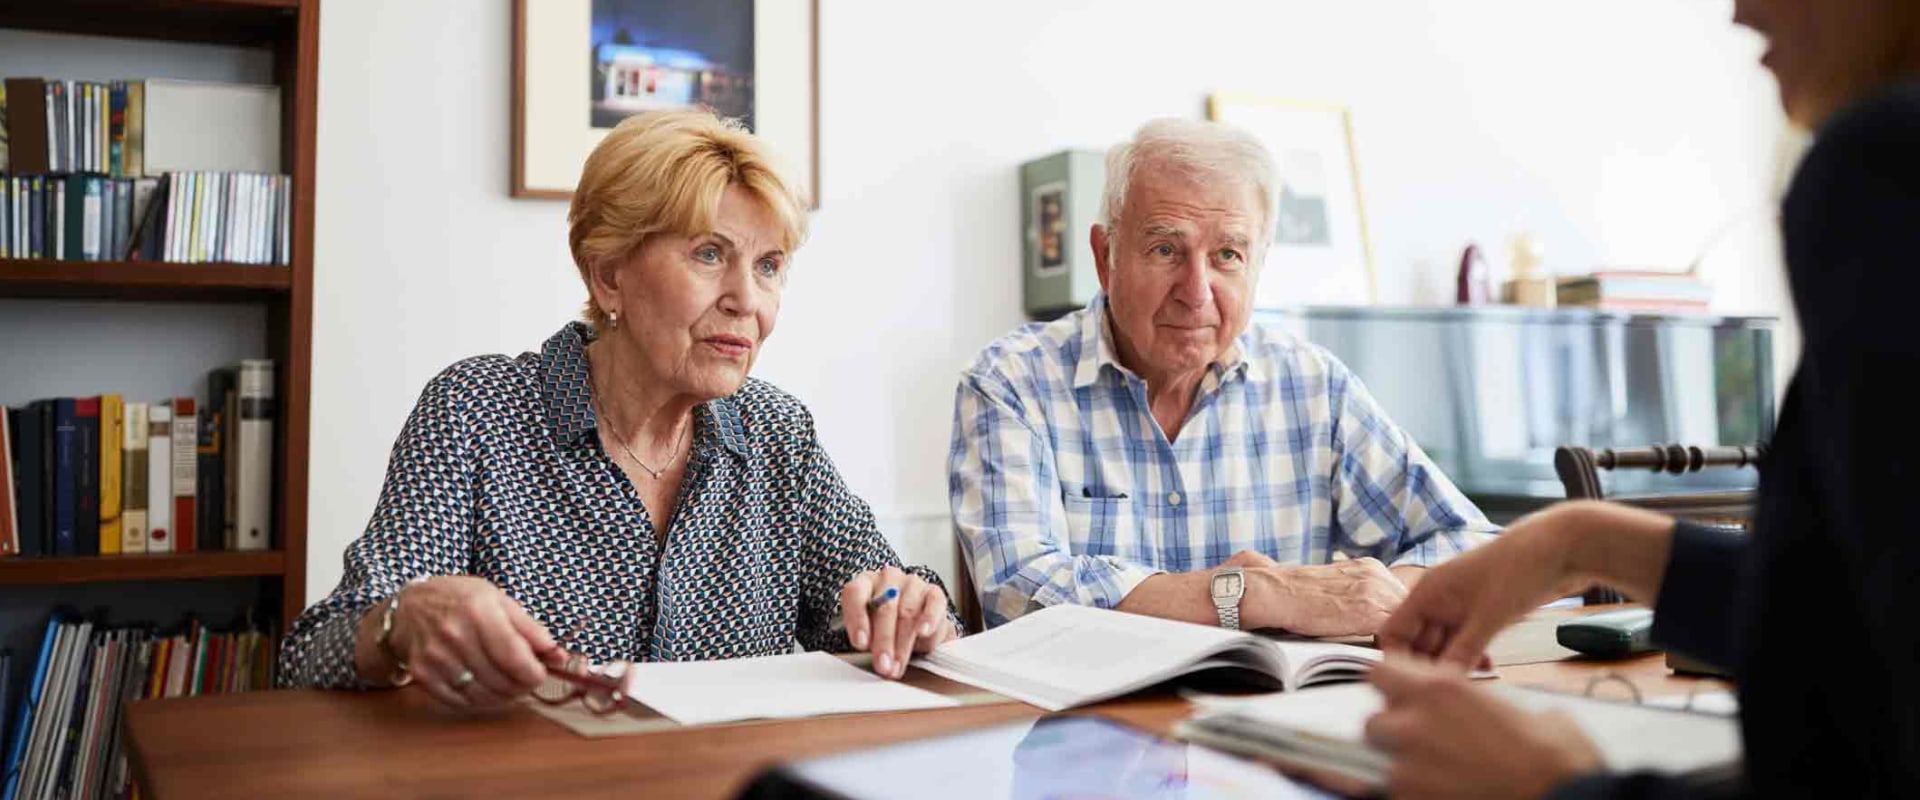 Retirement Investment Advisors: An Overview of Their Role in Retirement Planning